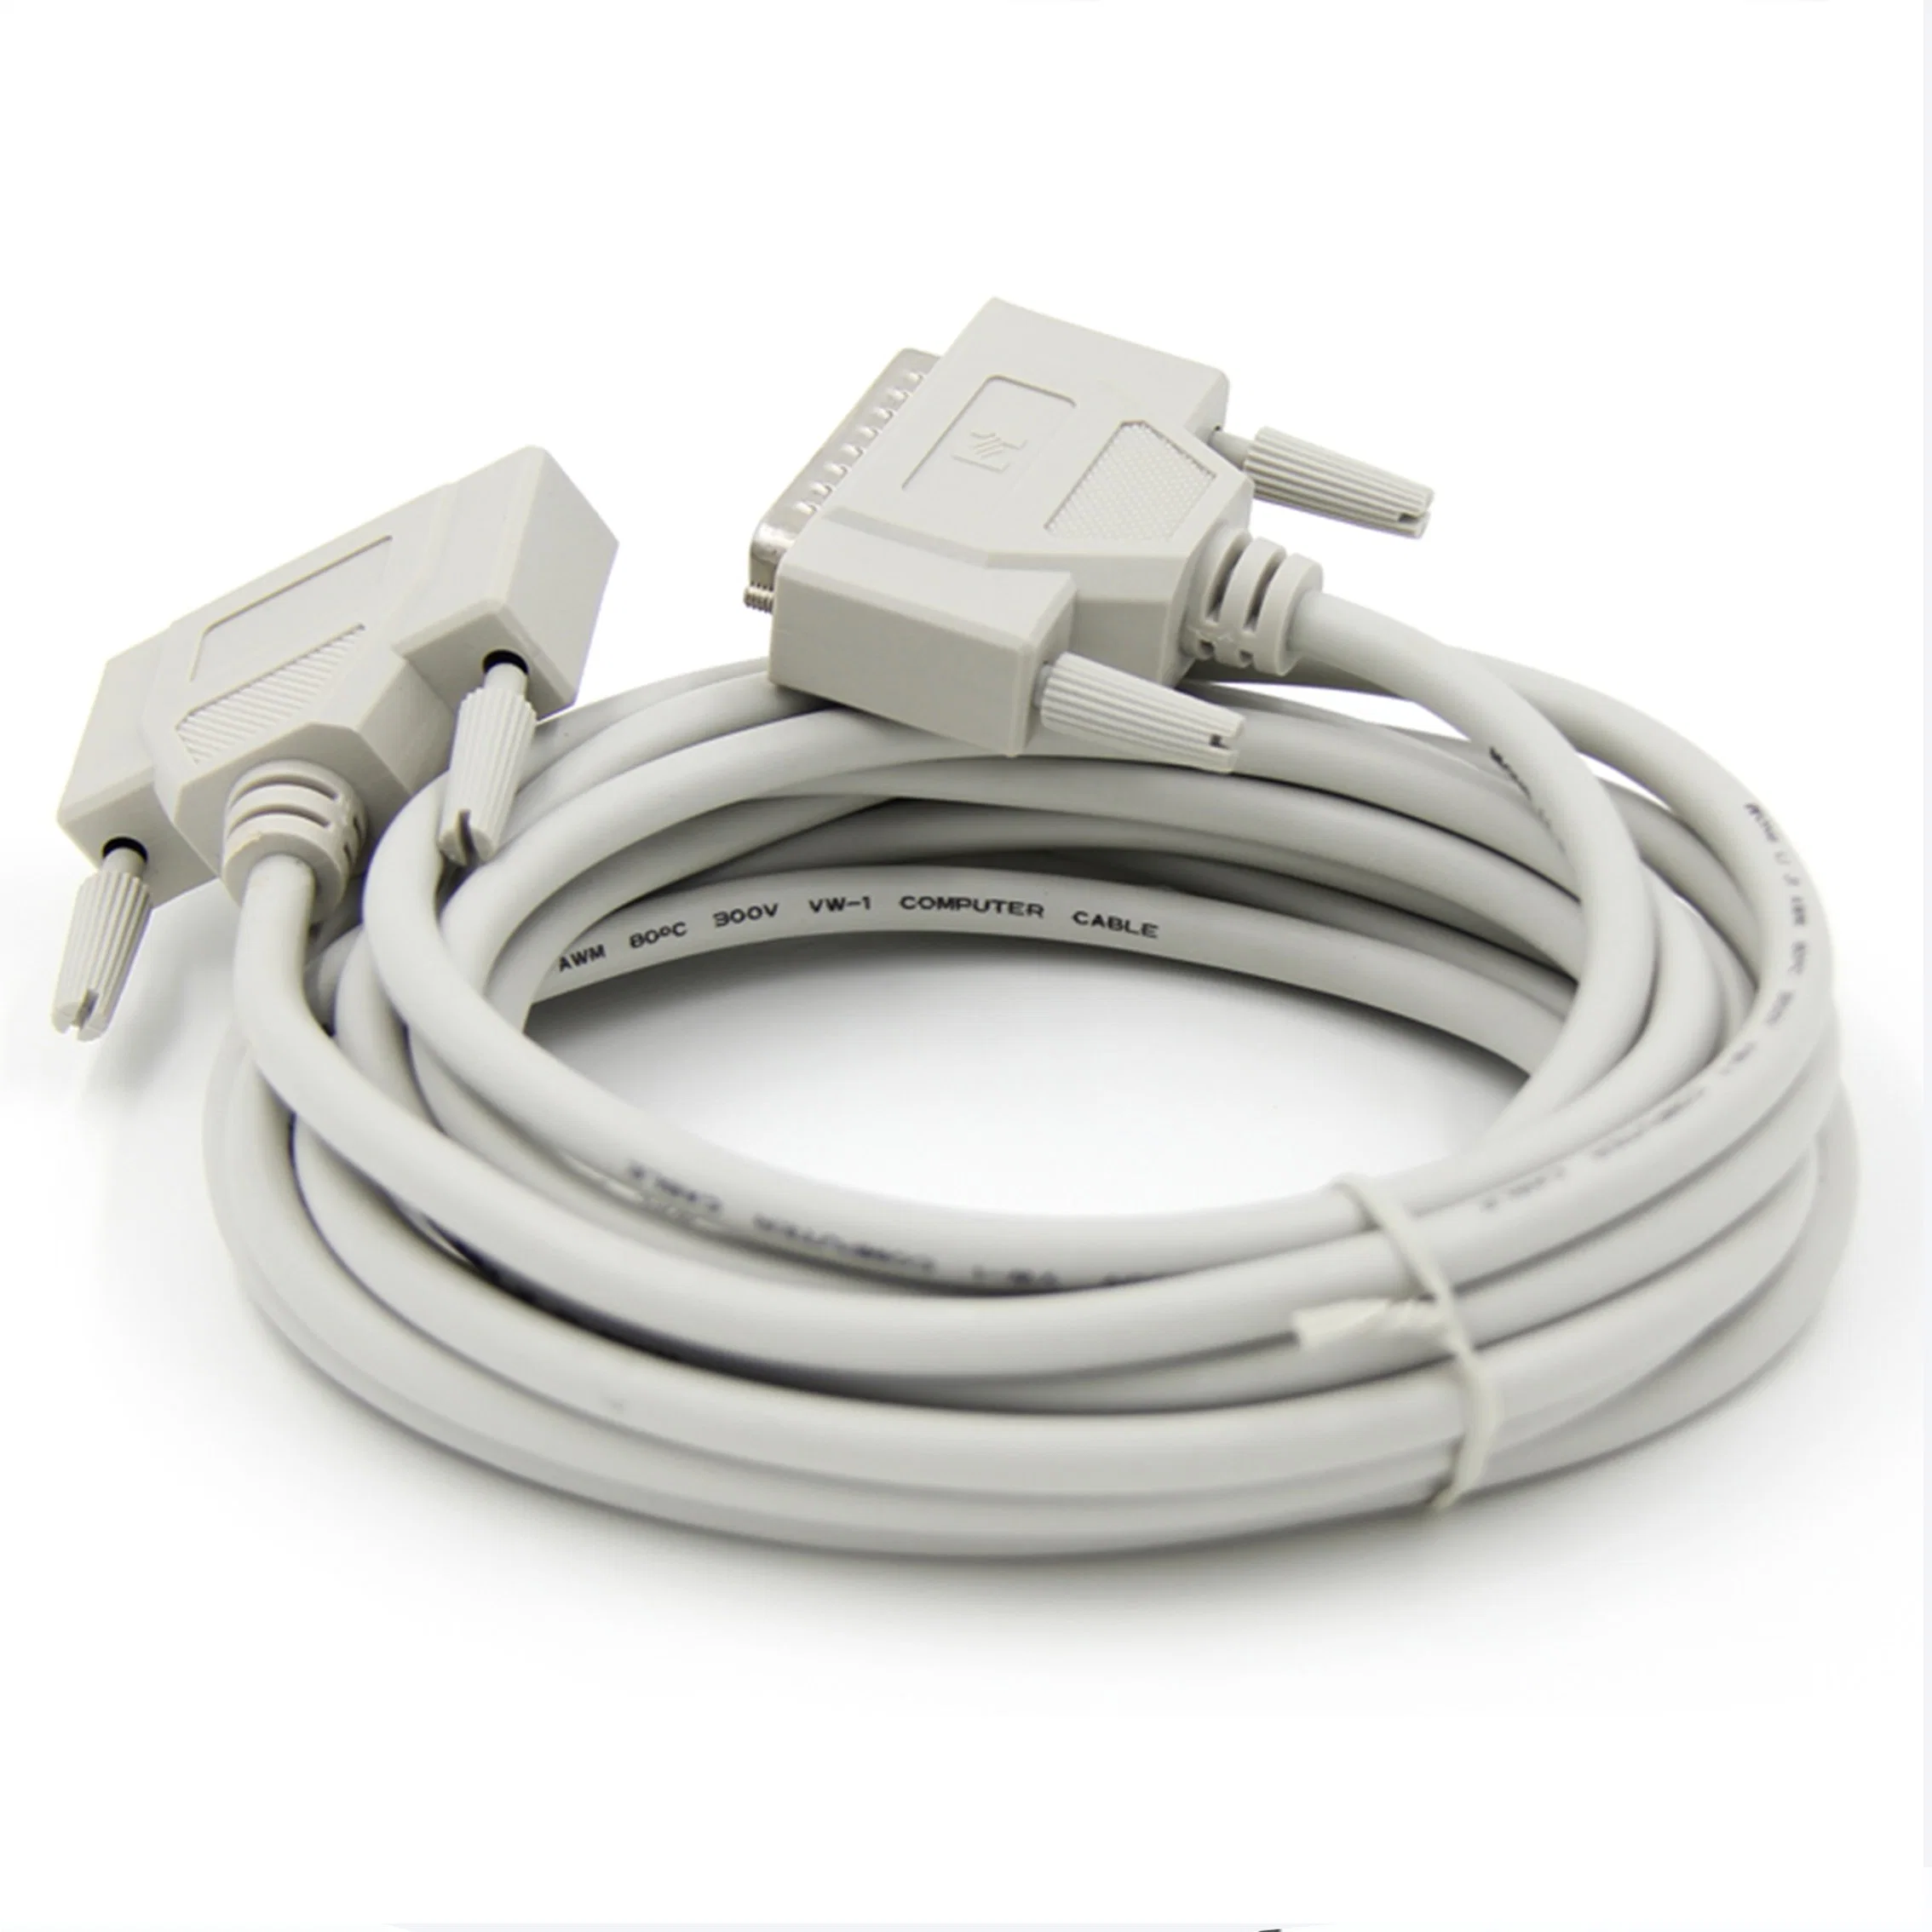 dB25 to Cn36 Cable 6FT Printer Cable